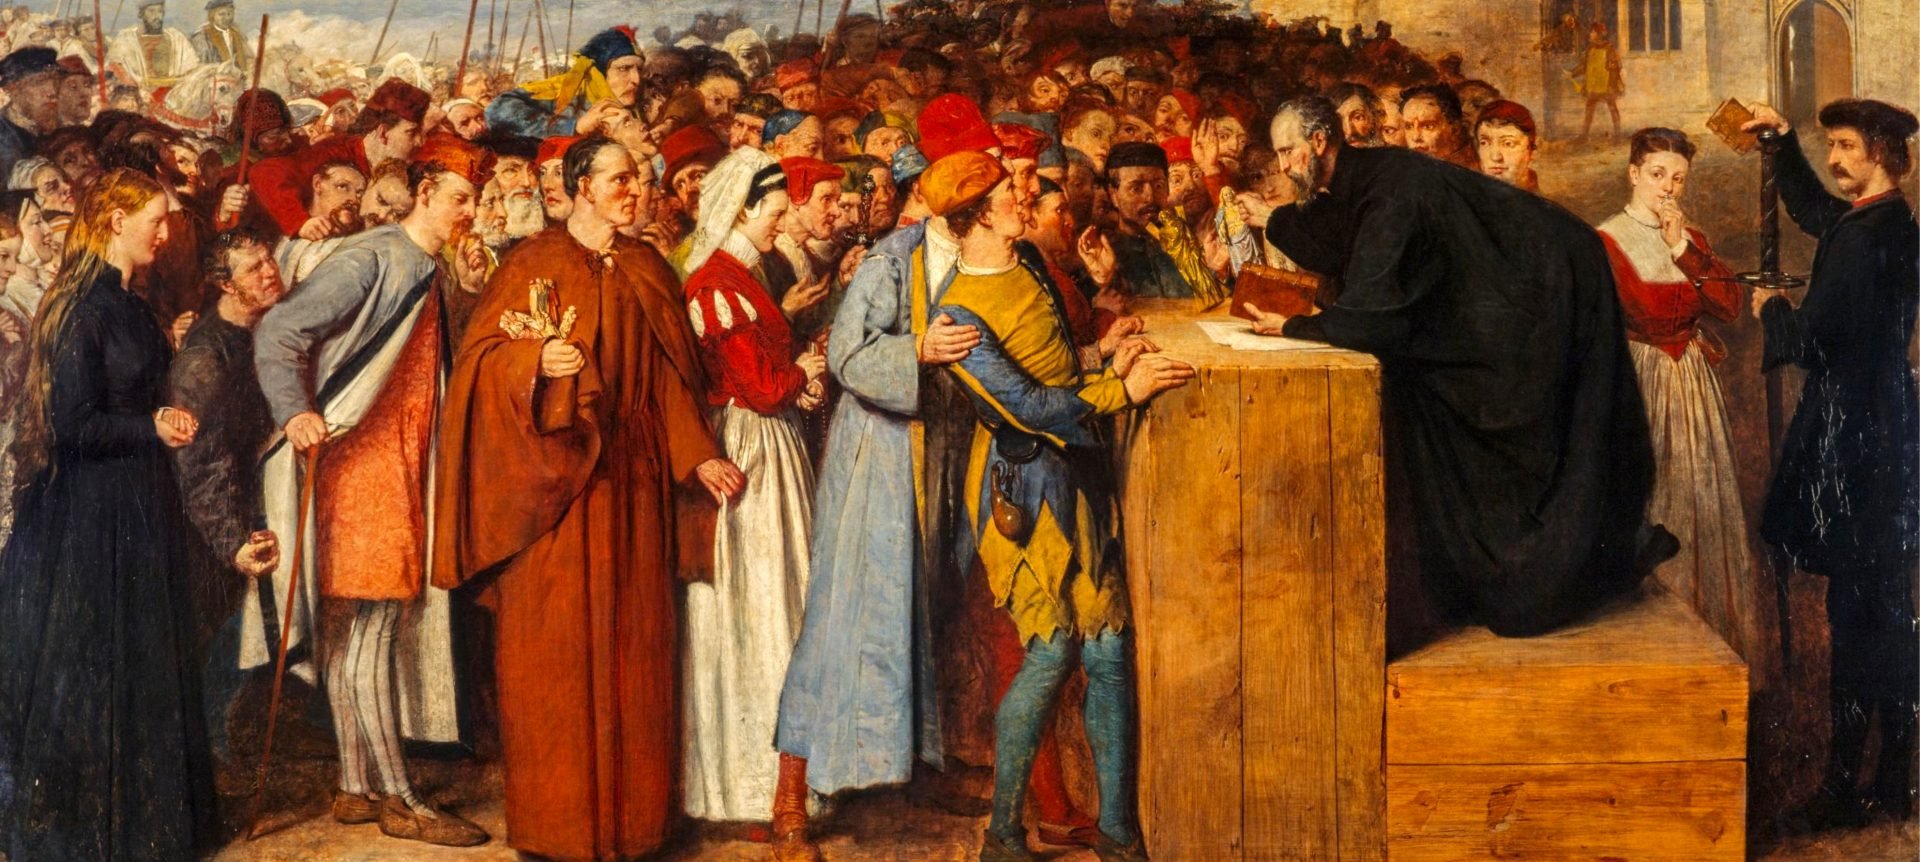 1871 painting by William Fettes Douglas depicting Wishart fervently preaching against Mariolatry. A diverse crowd of attentive listeners surrounds him, representing various social classes and ages. In the background on the far right, John Knox stands with a double-handed sword.